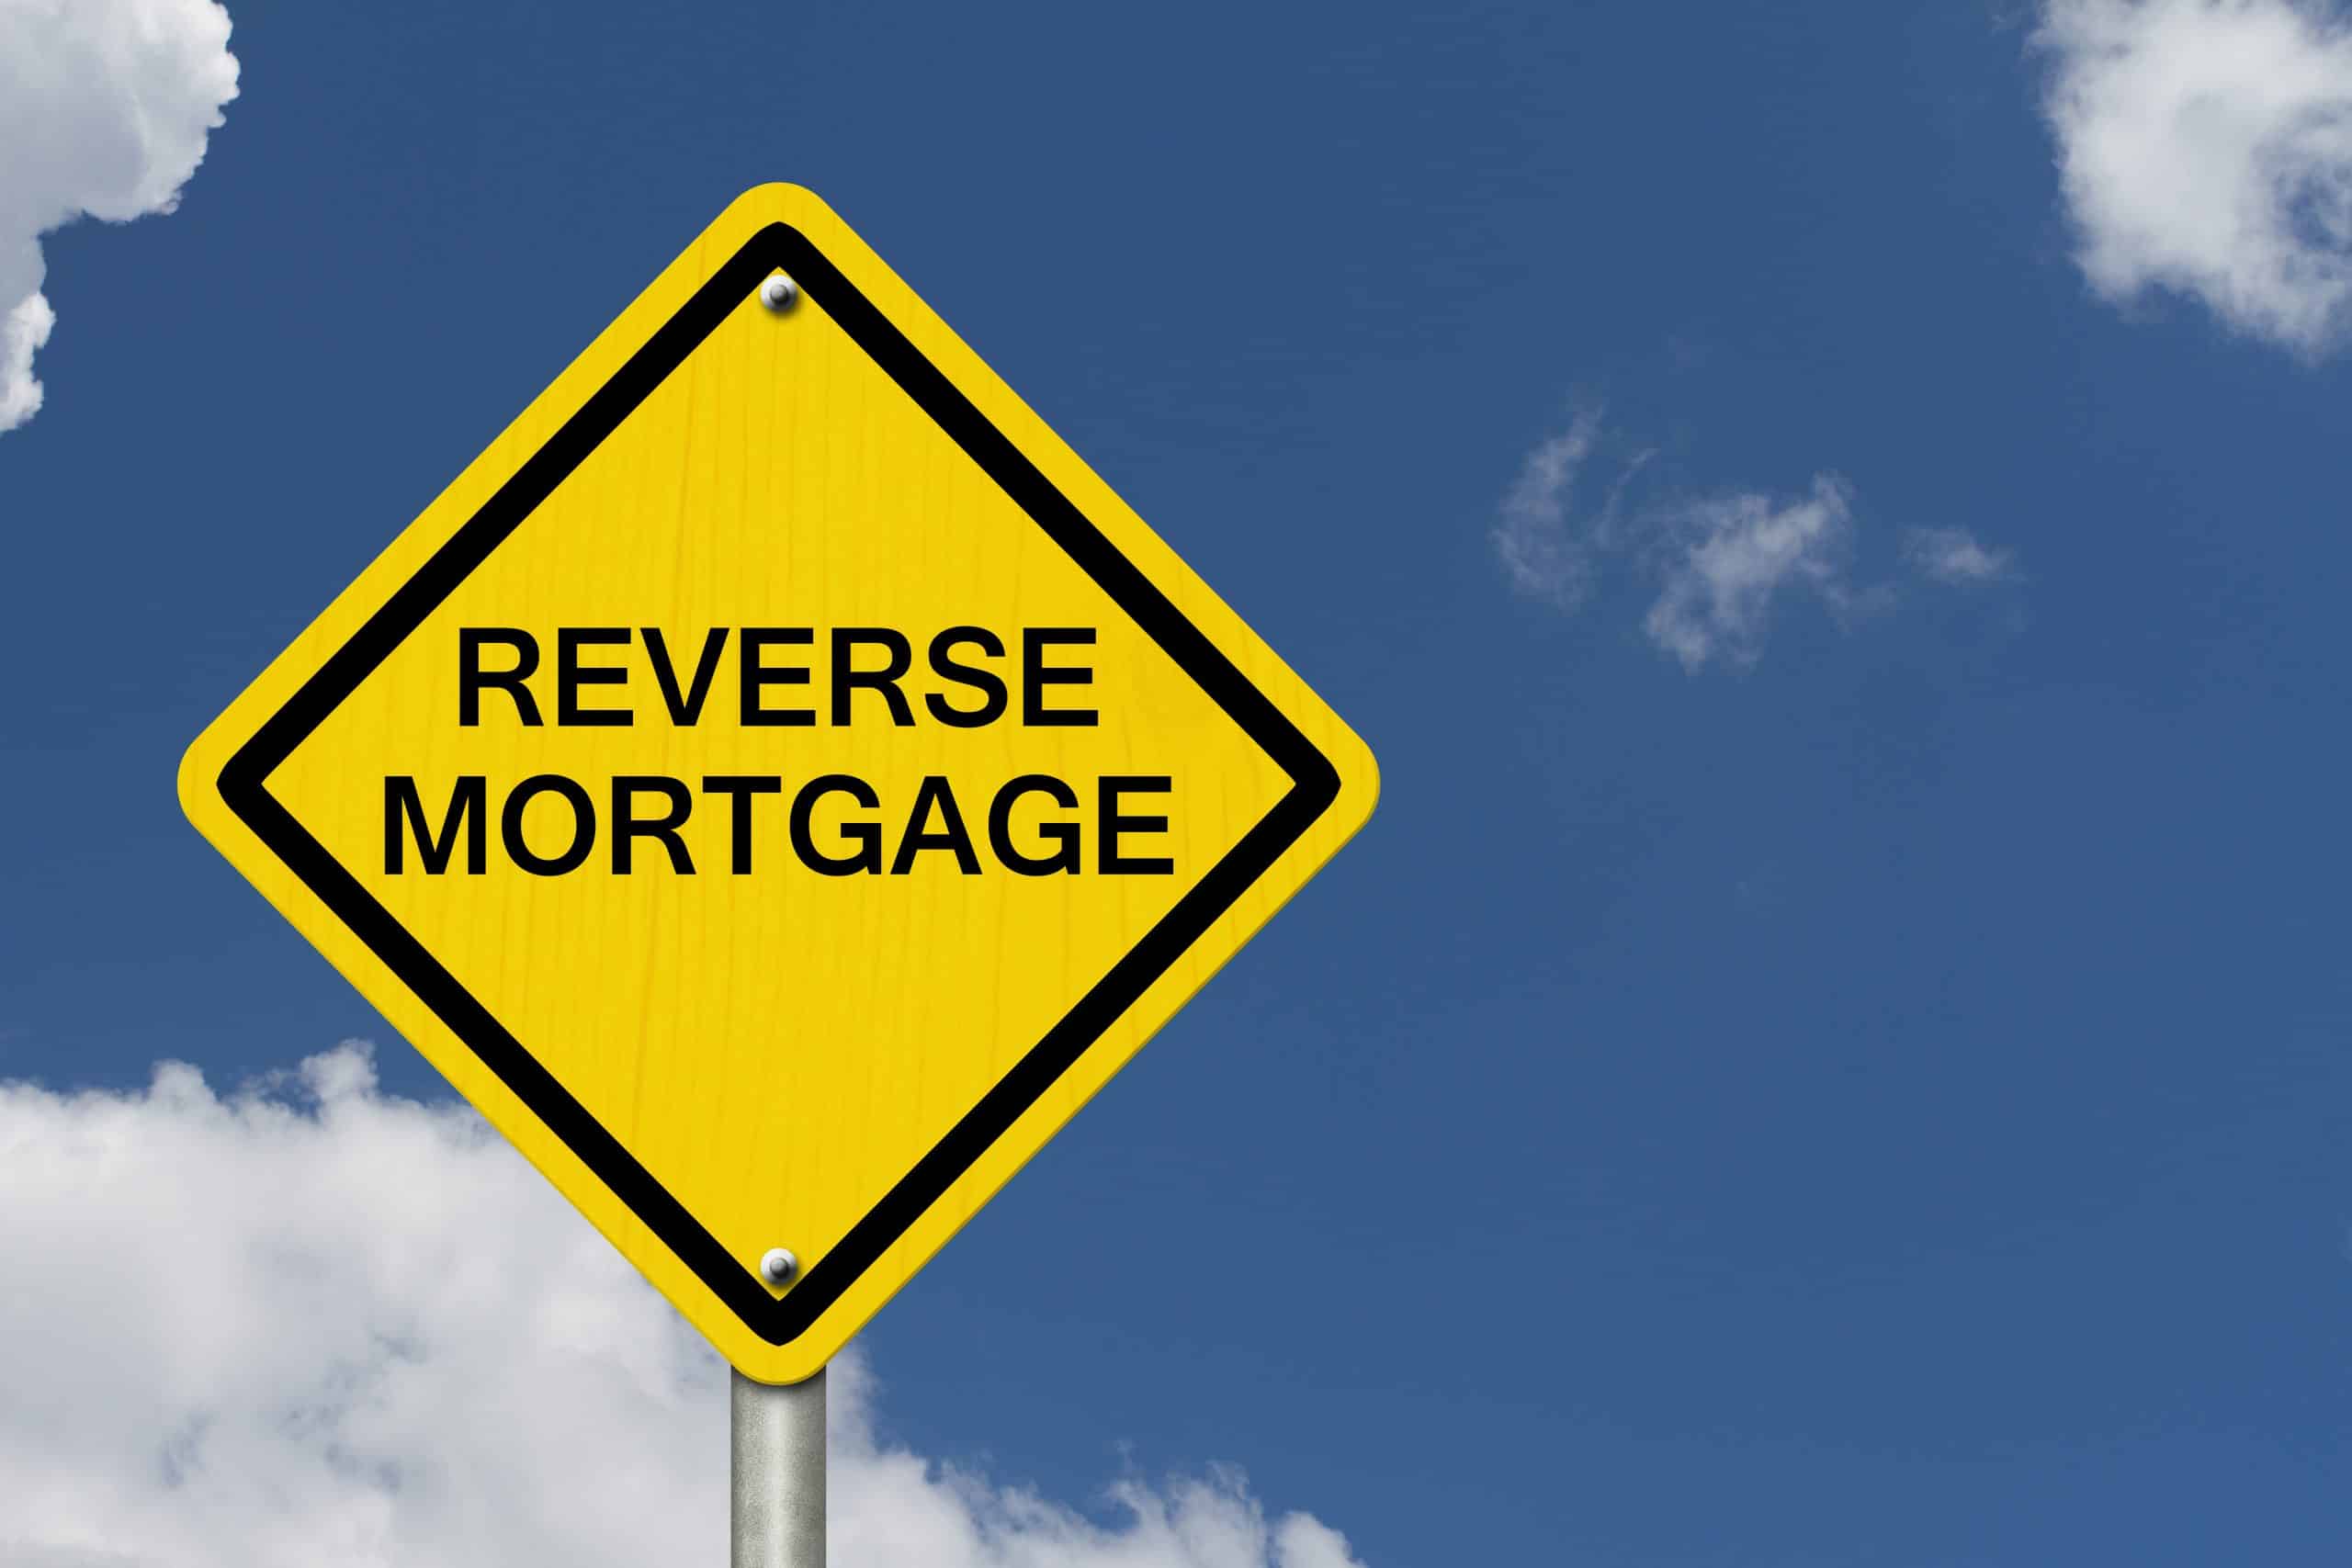 GAO Provides Caution to Risks of Reverse Mortgages